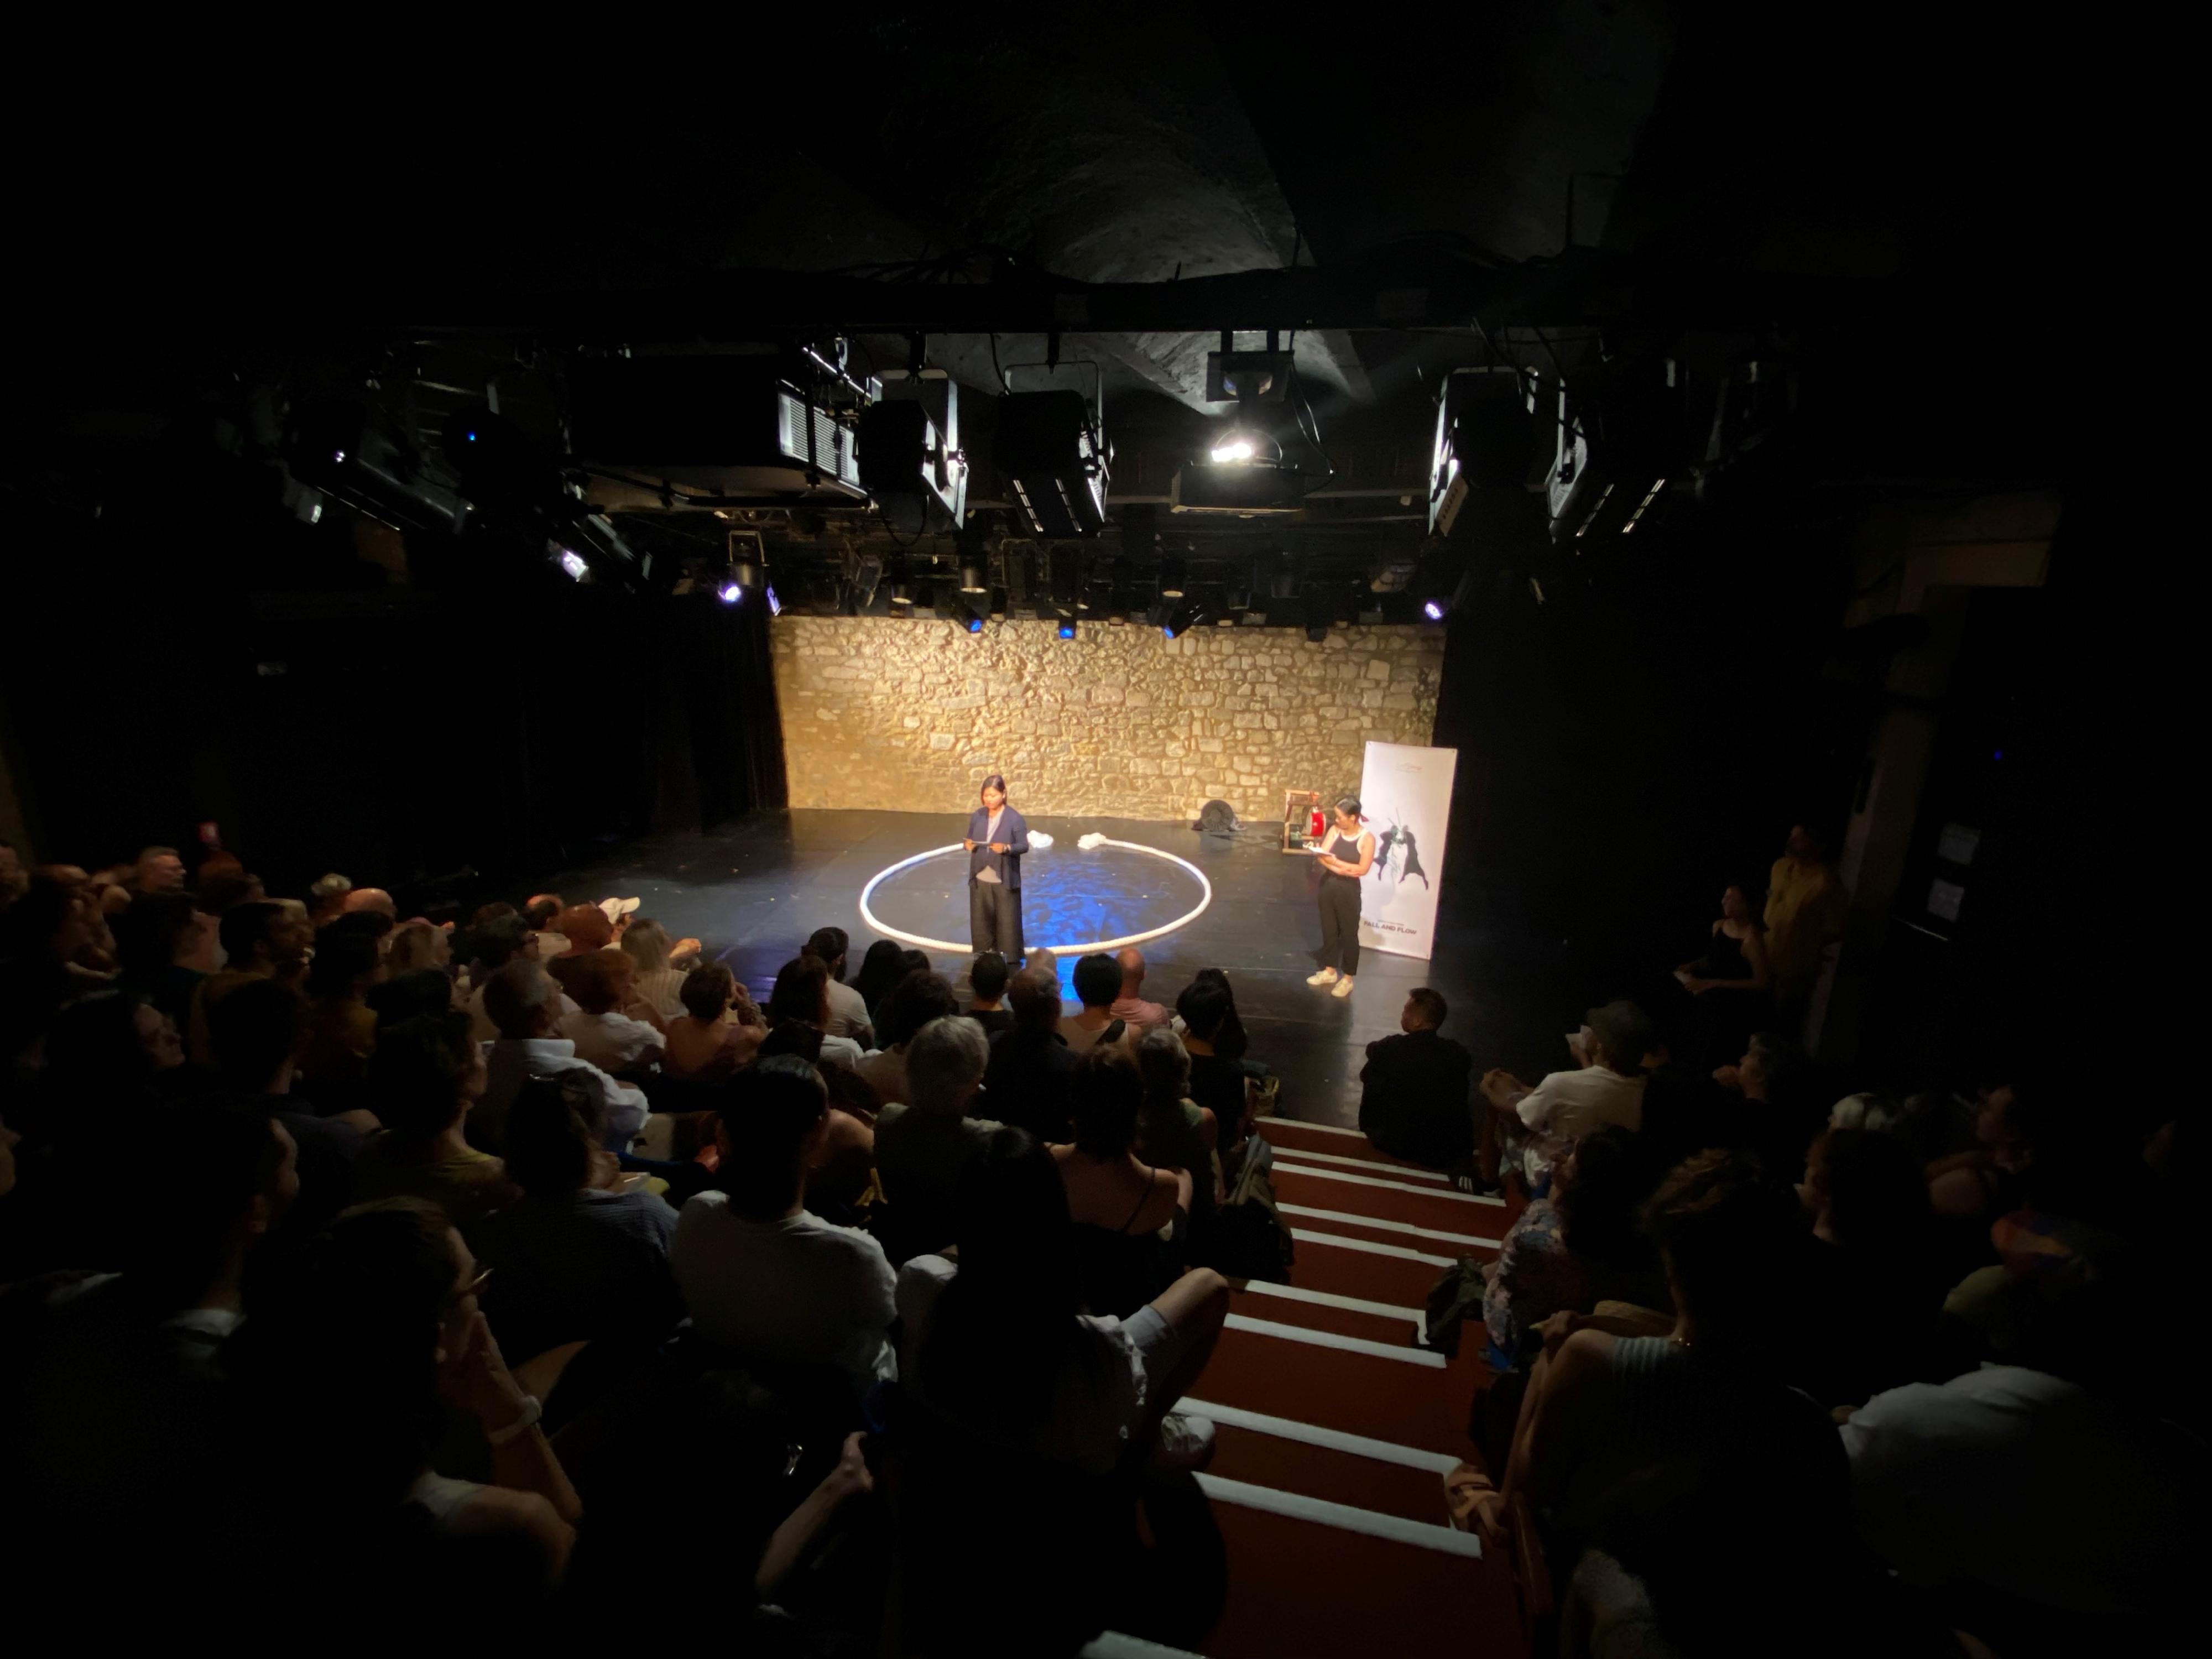 The Hong Kong Economic and Trade Office in Brussels supports a Hong Kong theatre group, Théâtre de la Feuille, to give 18 performances of its work, "Fall and Flow", at the Festival Off Avignon. Photo shows Special Representative for Hong Kong Economic and Trade Affairs to the European Union, Miss Shirley Yung, addressing the audience of Théâtre de la Feuille's performance on July 9 (Avignon time) at the Festival Off Avignon.